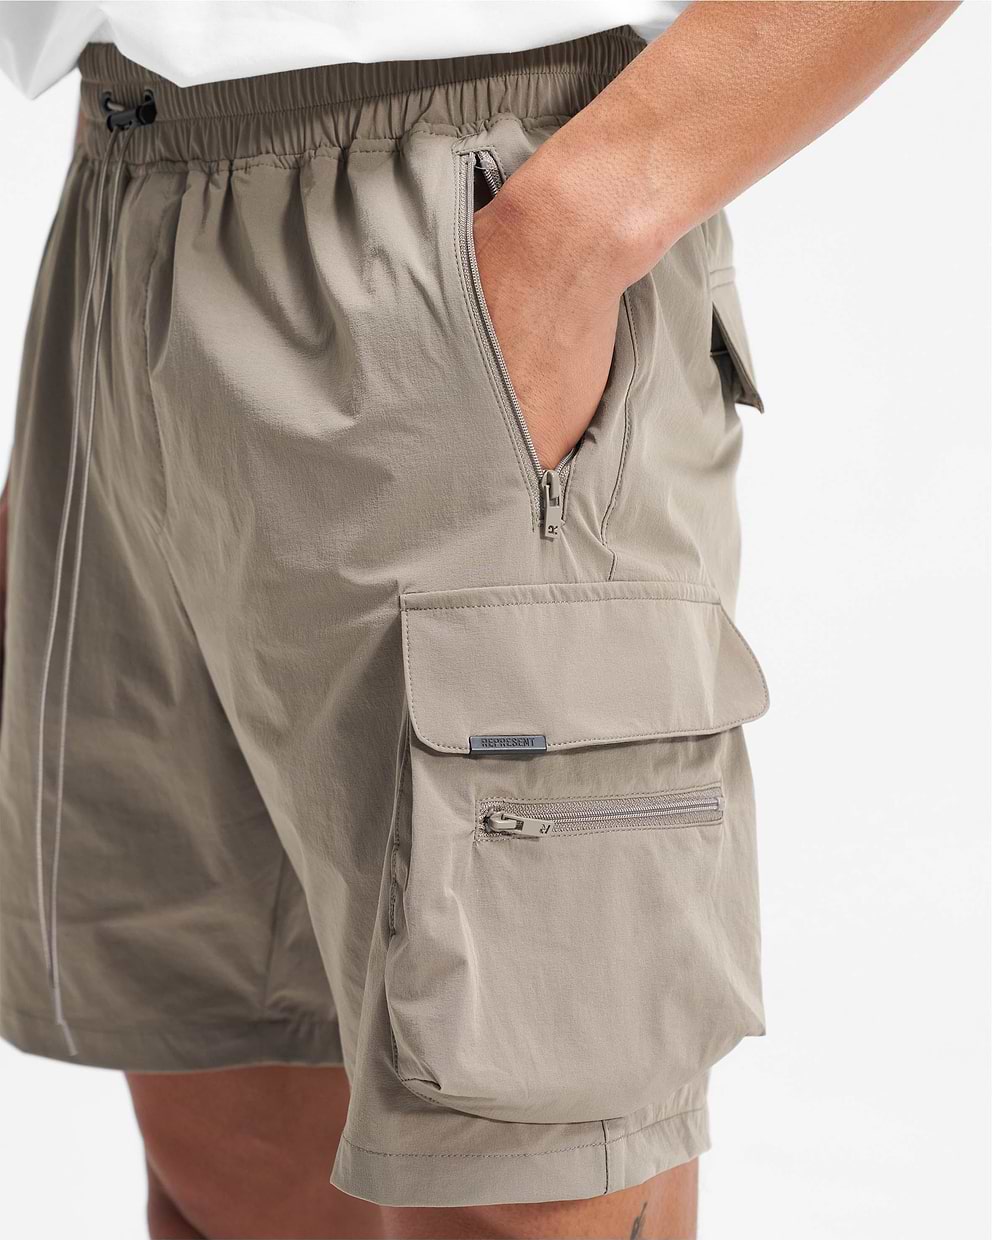 247 Shorts - Taupe